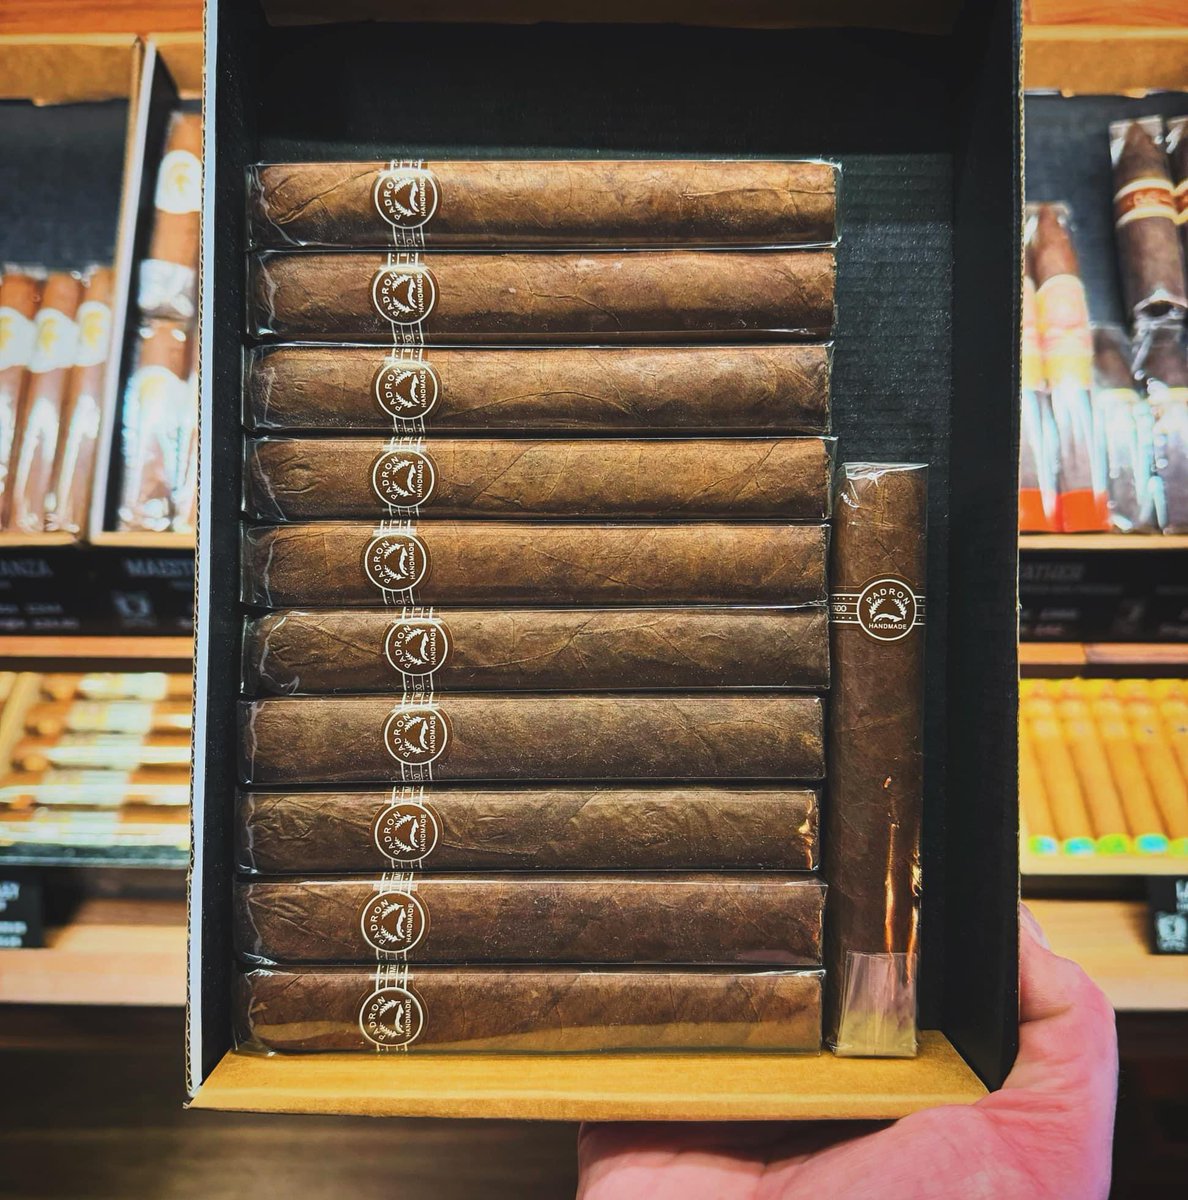 A sensationally rich and indulgent stick, @padroncigars’ 2000 Robusto Maduro brings together mature notes of wood, leather and dark chocolate with softer sweeter tones of nougat, toffee and nuts in tremendous fashion! 🤤

cascnation.com/bars-shops/abe…

#hed #cascshop #cascnation